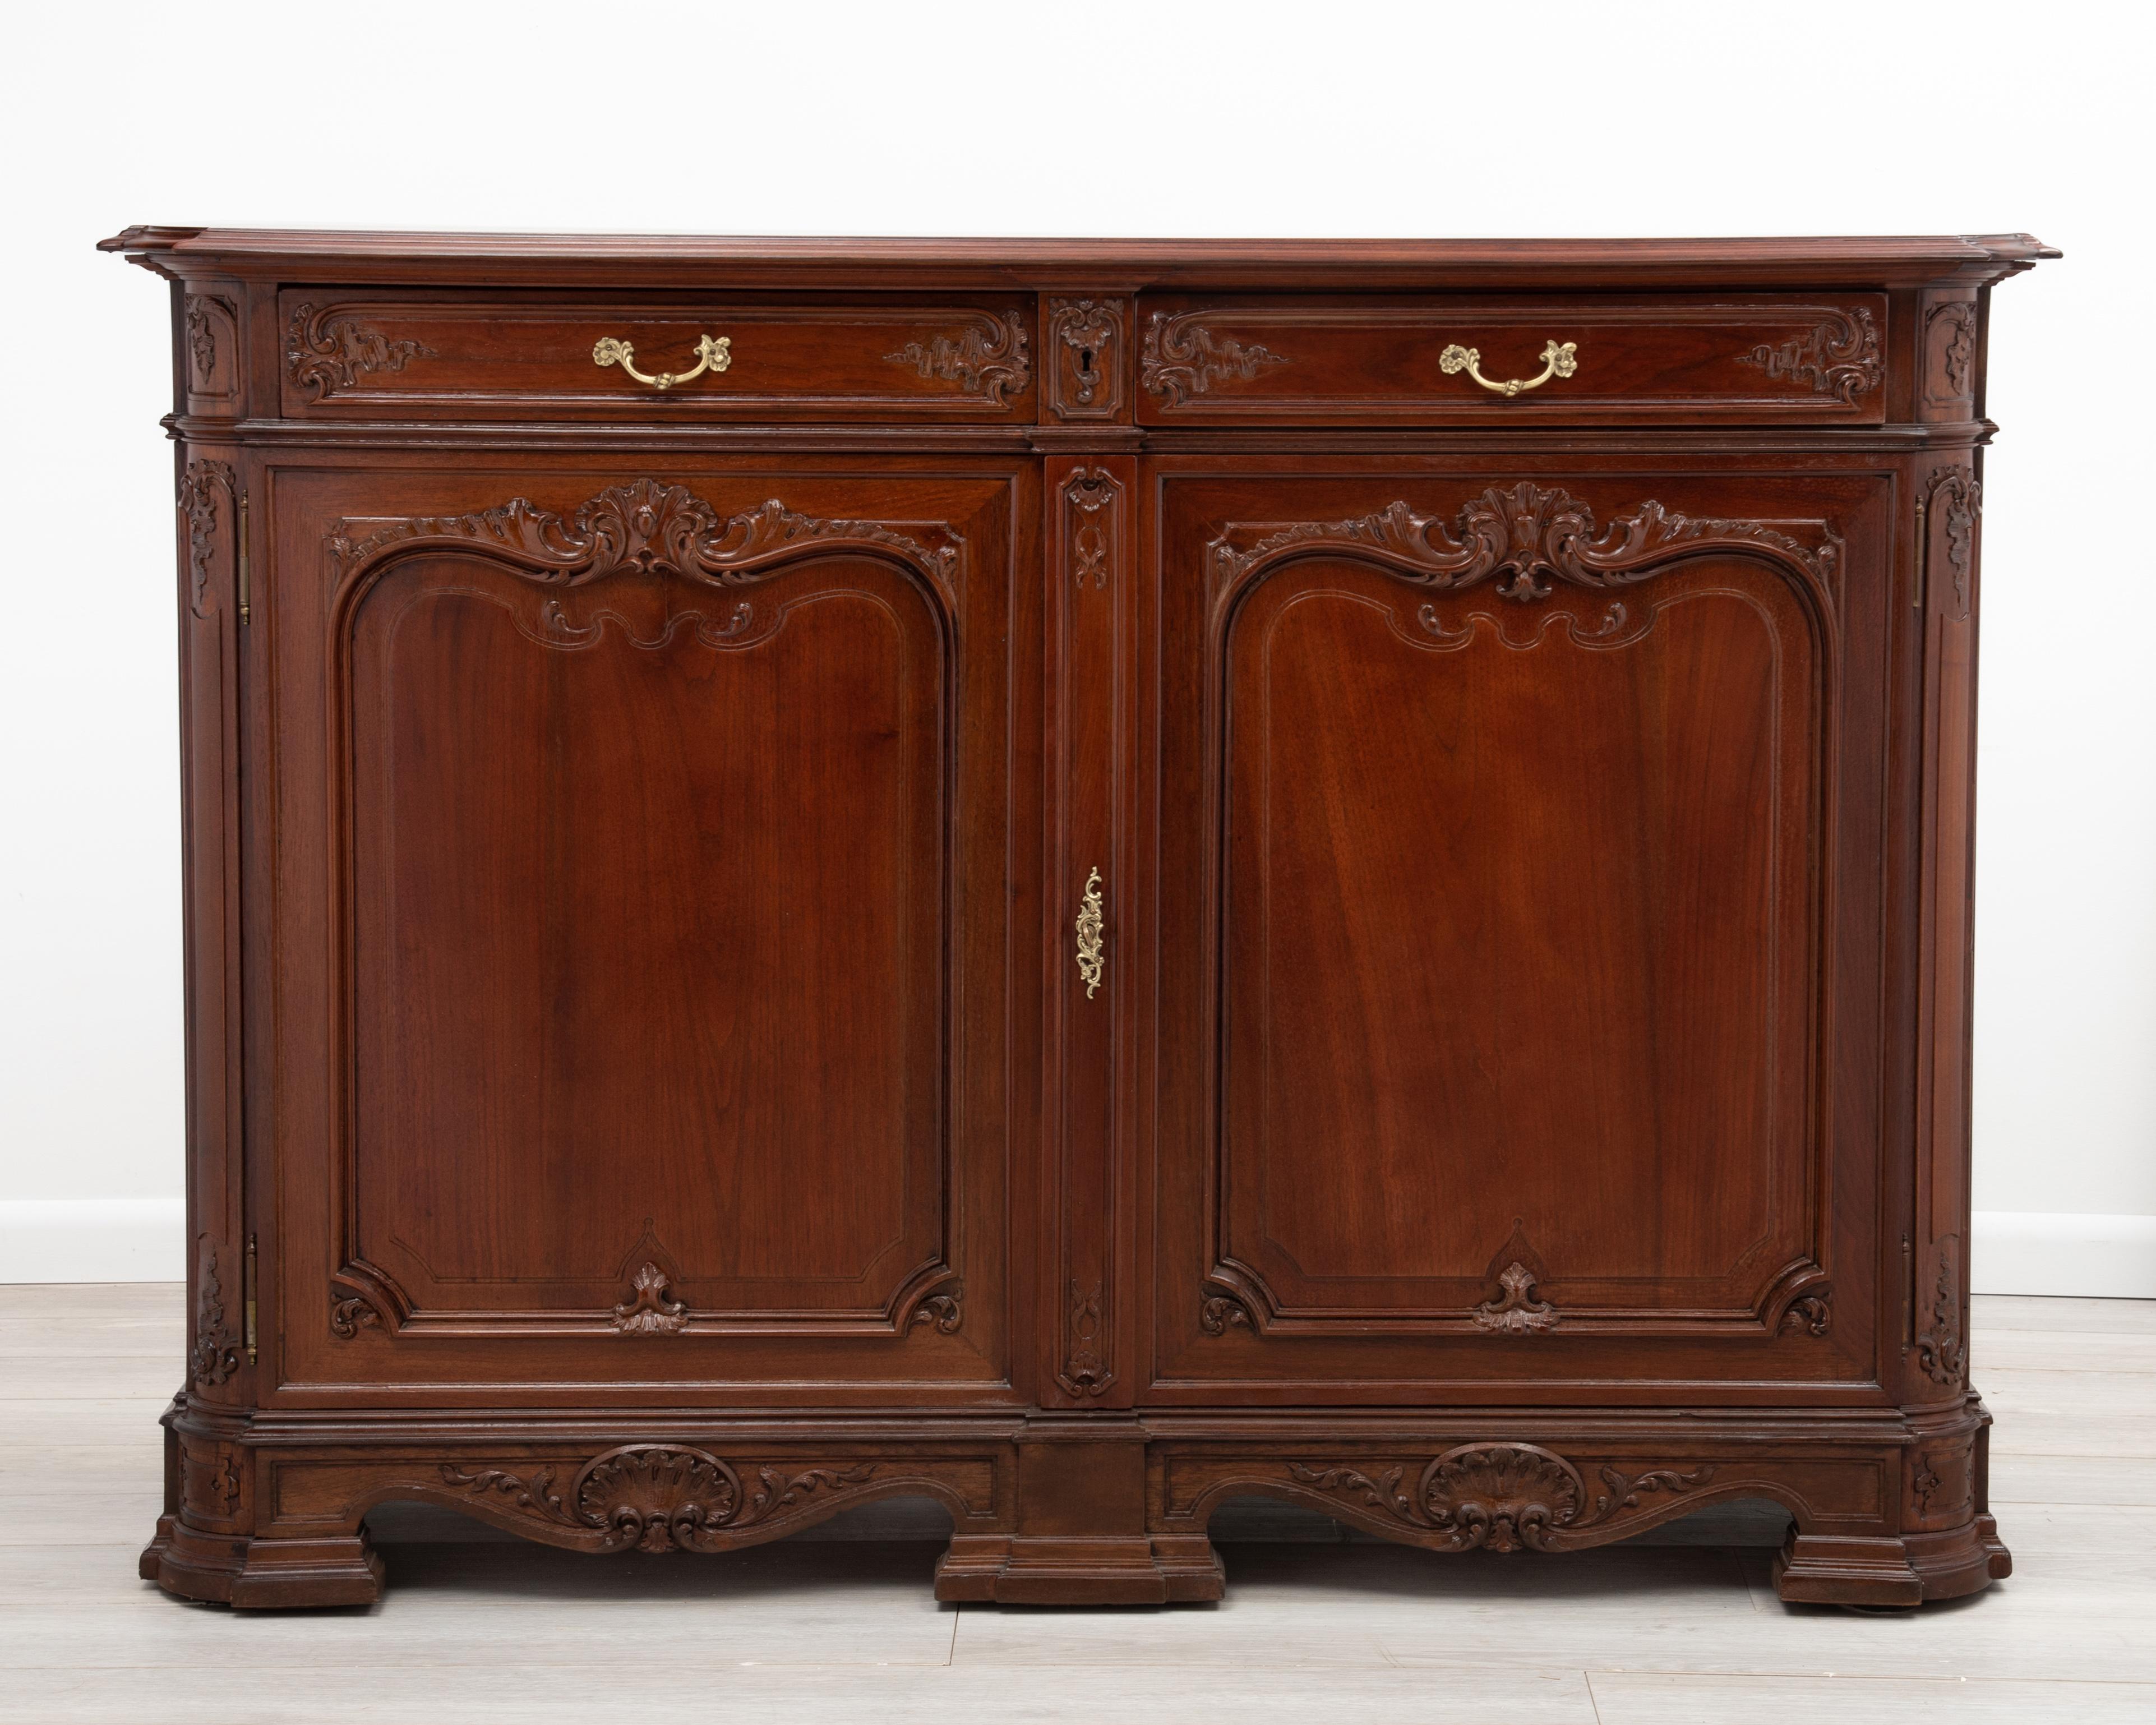 An impressive French Provincial walnut sideboard or buffet with two drawers over two paneled doors. Great wood selection, beautifully restored.